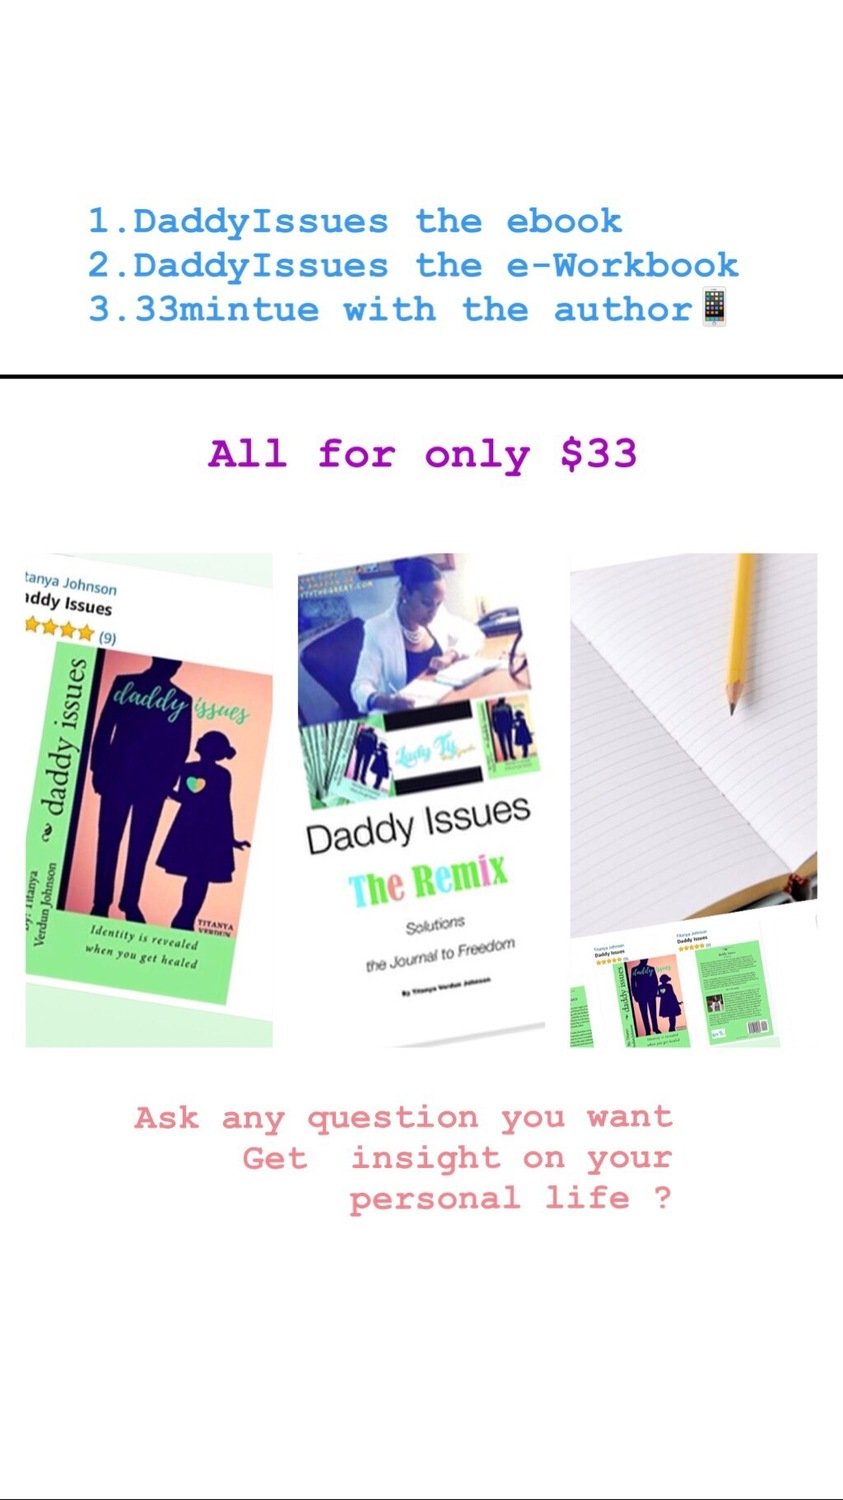 Daddy Issue $33, (electronic) Book & Workbook, Bonus 33 minutes 1on1 Session w the author LadyTy 